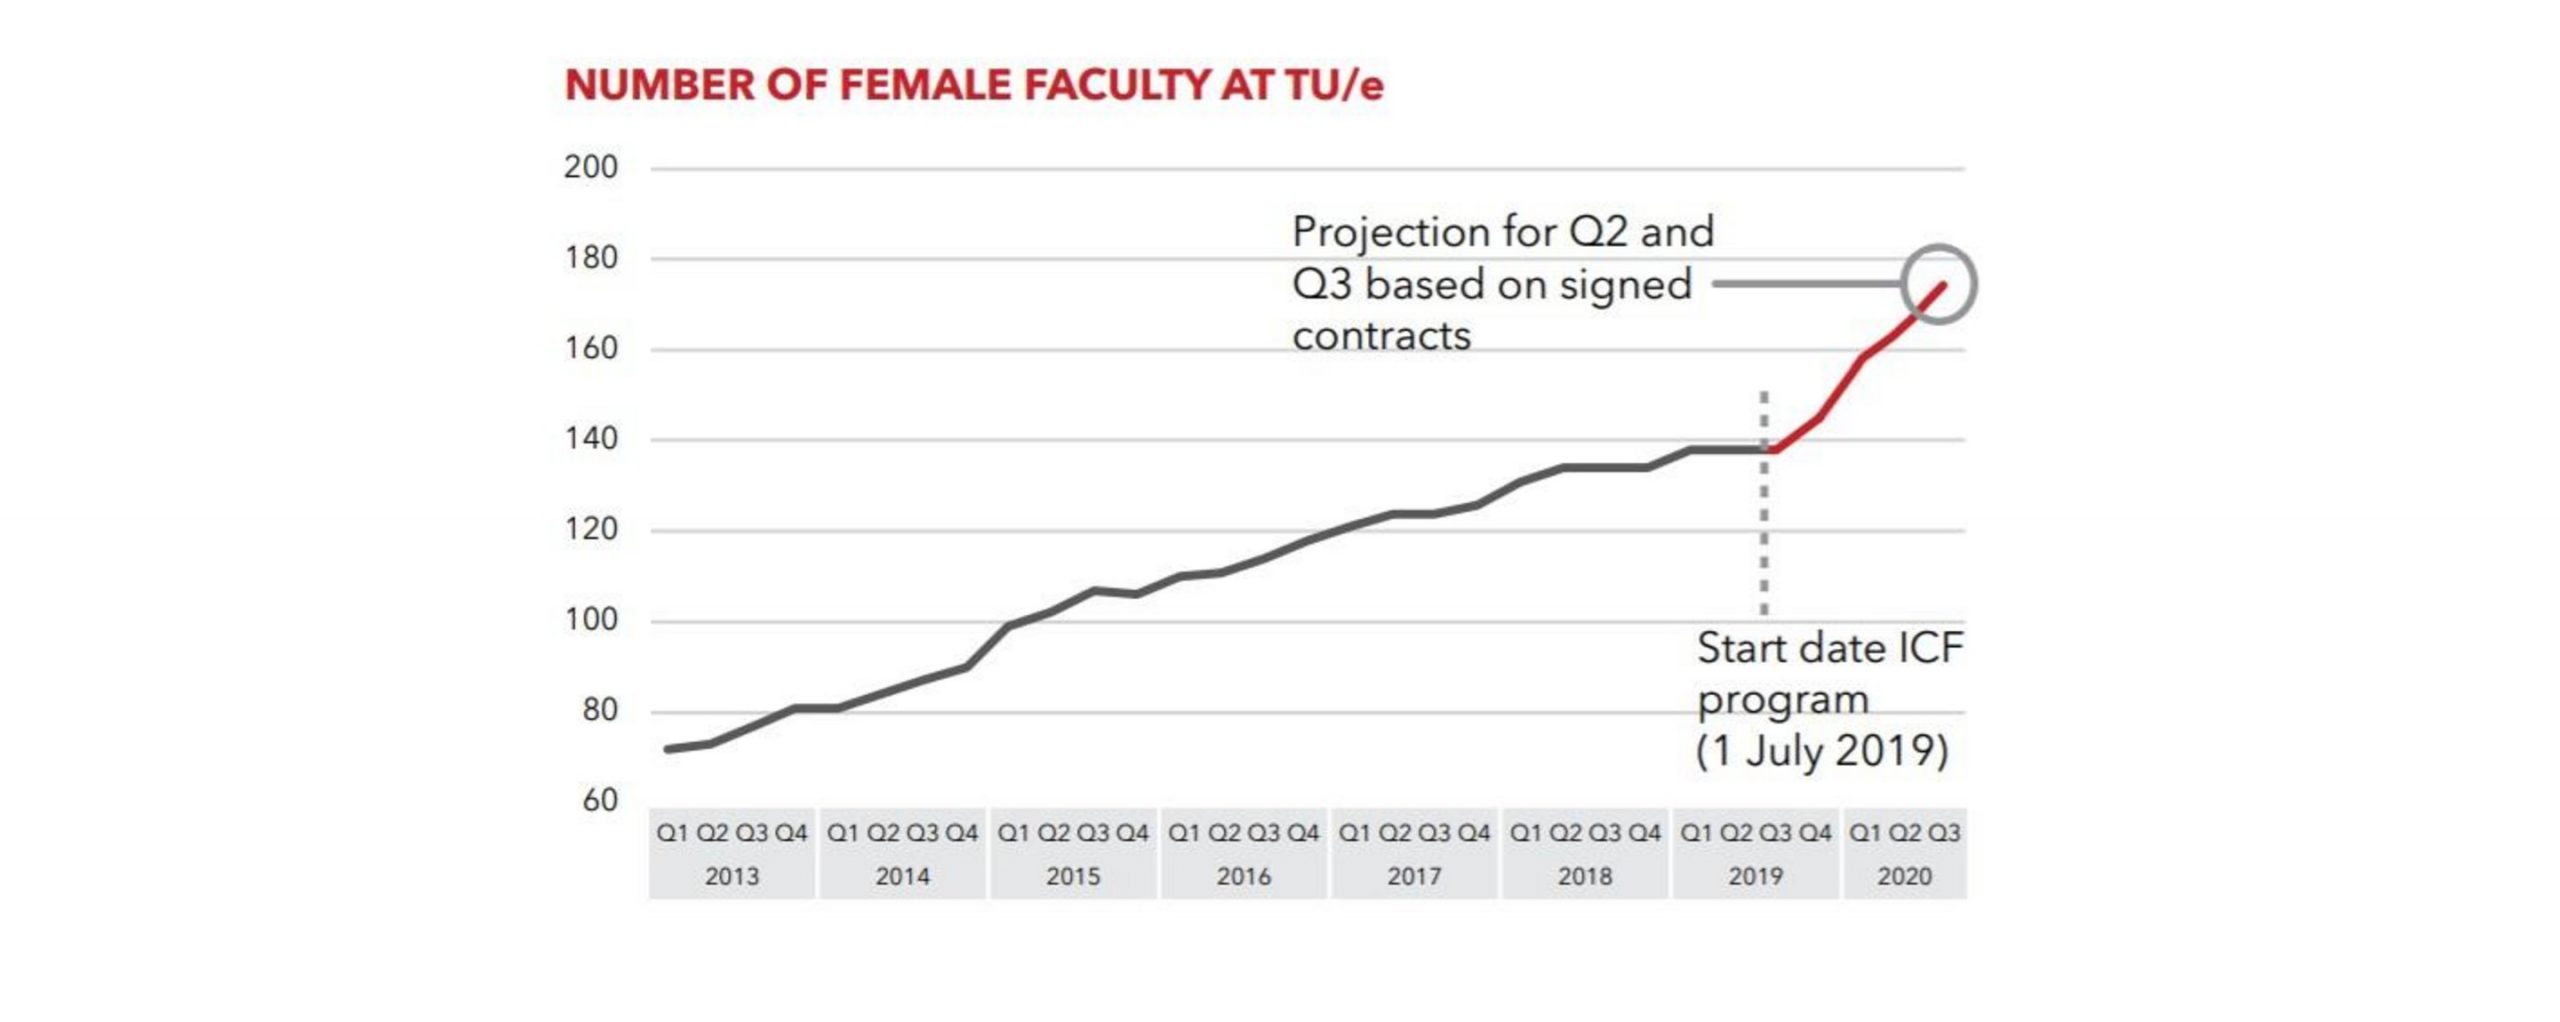 csm_Number of female faculty at TUe_Irene Curie_07-05-2020_b38e81fadd